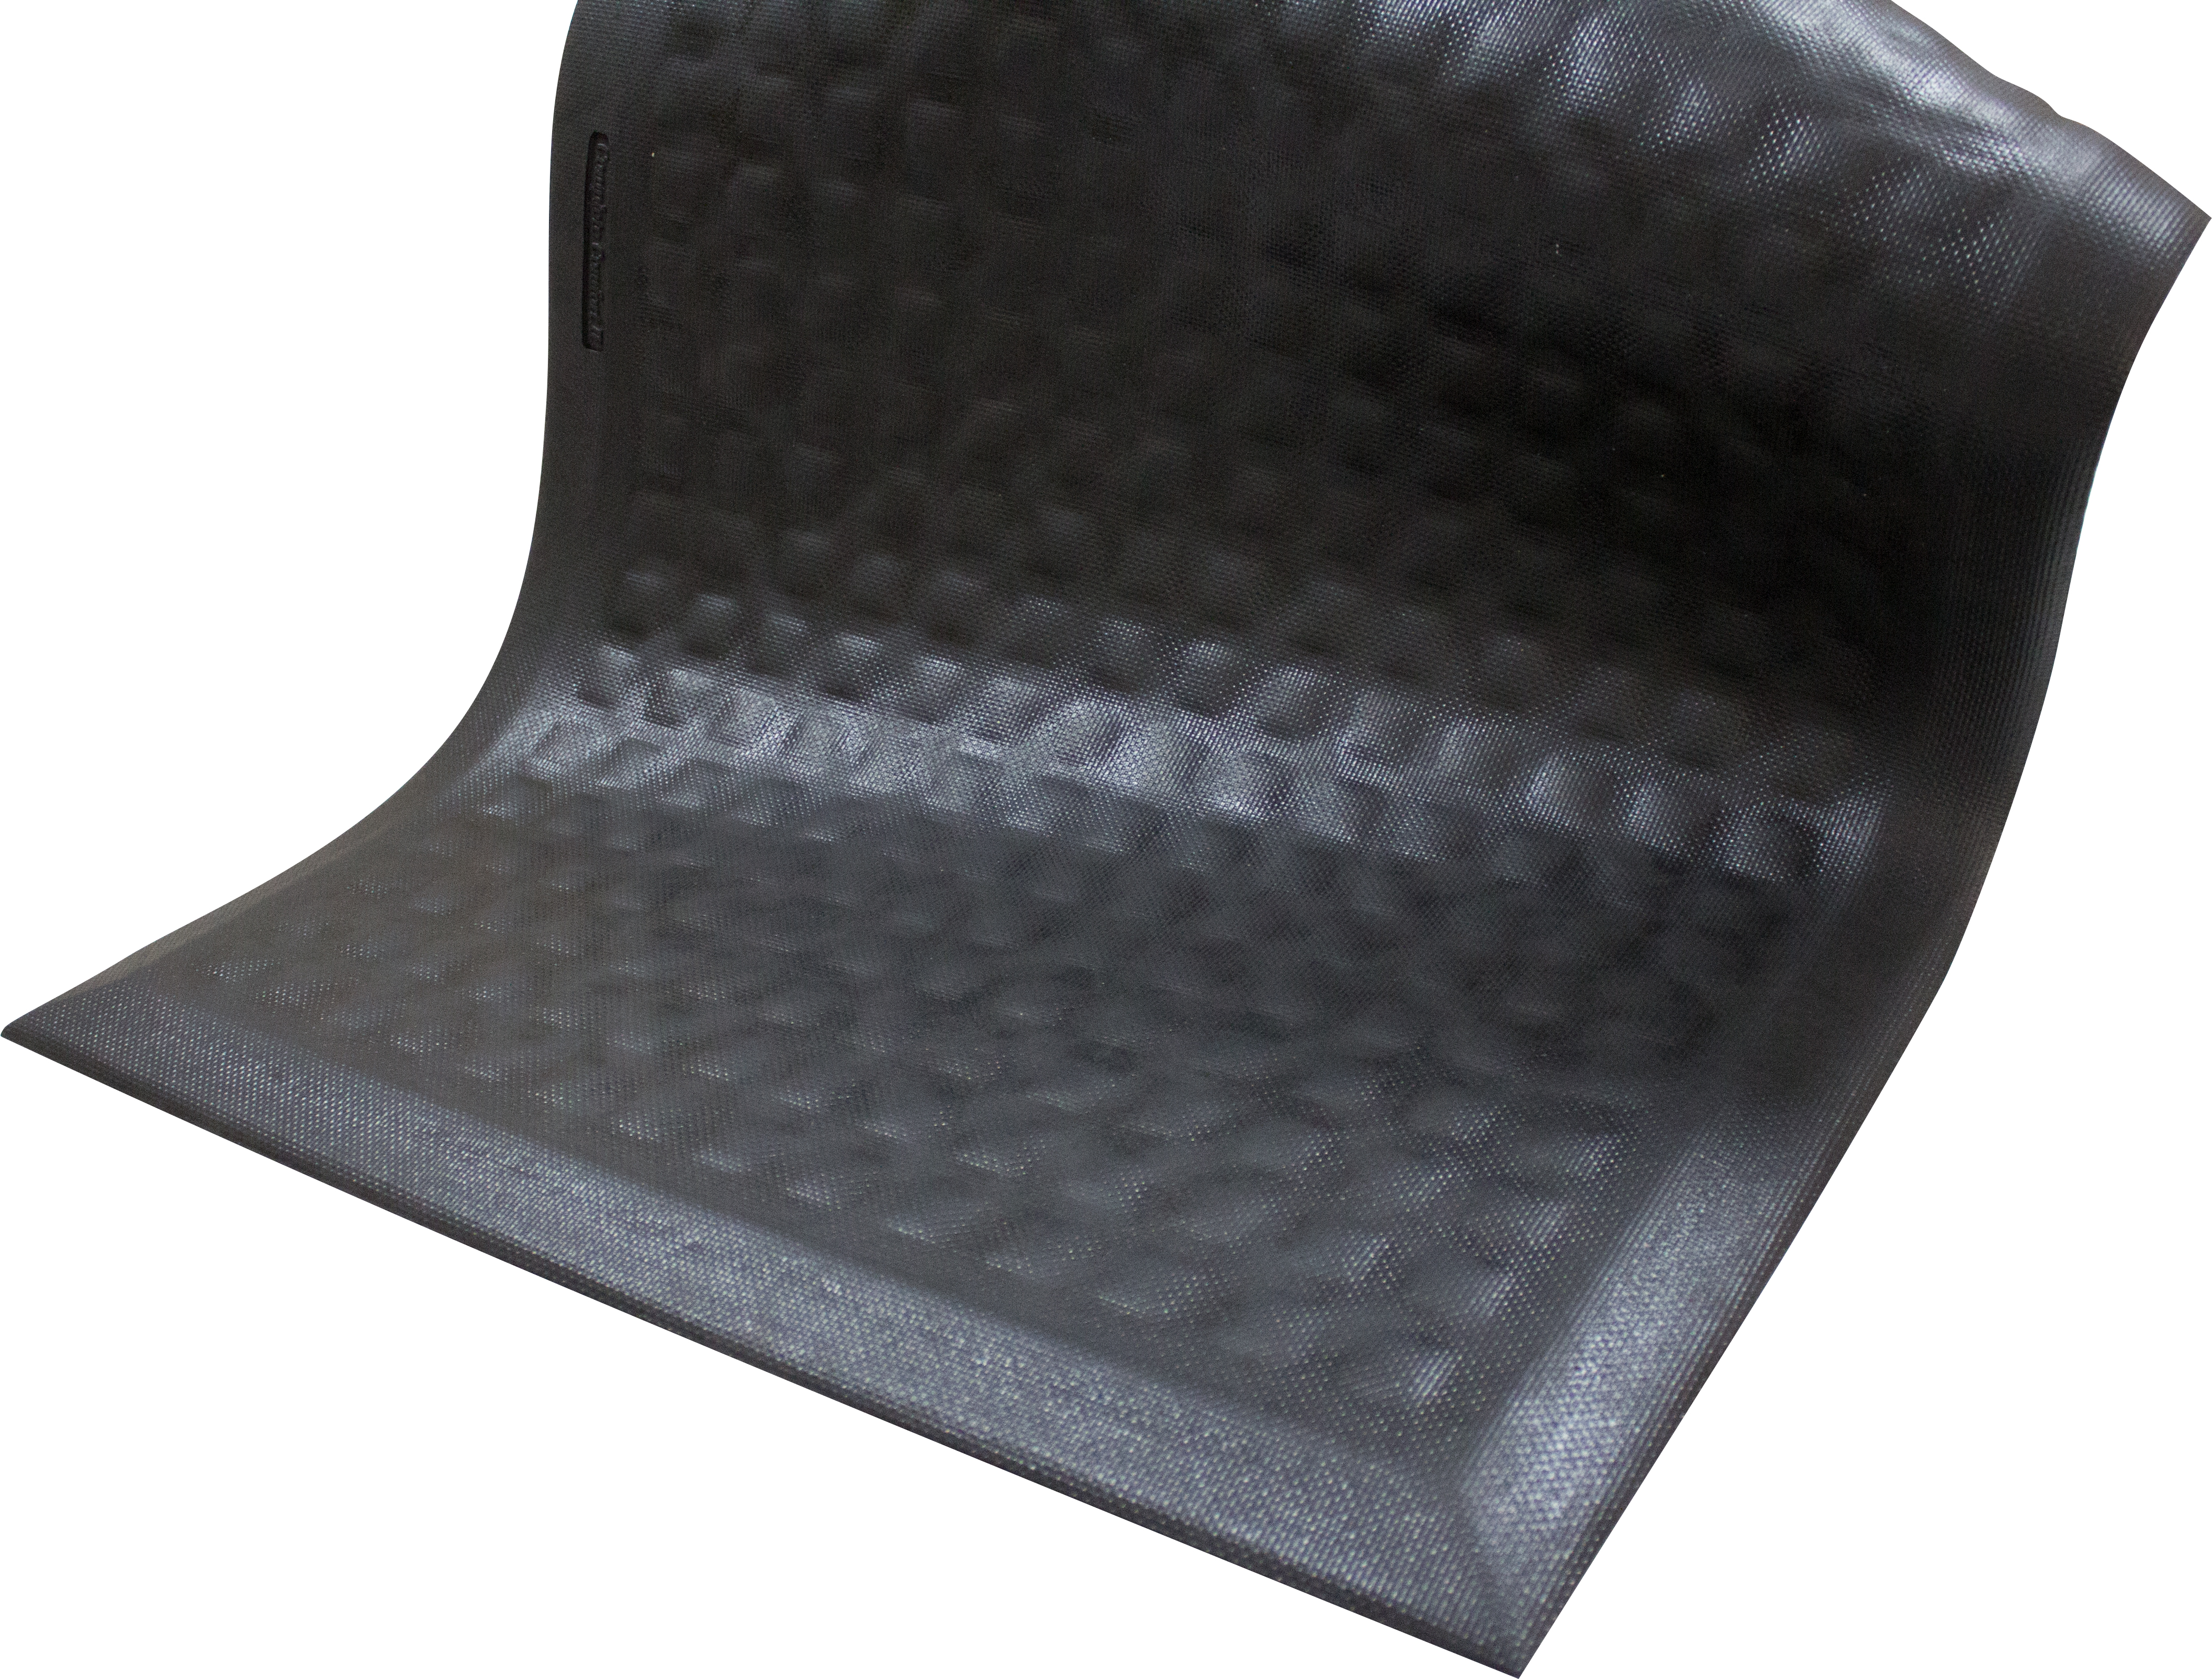 ESD Anti Fatigue Mats Nitrile Rubber top surface Complete Comfort II 60 x 90 cm Without Earth Grounding Plug Connection 812-5594-6090